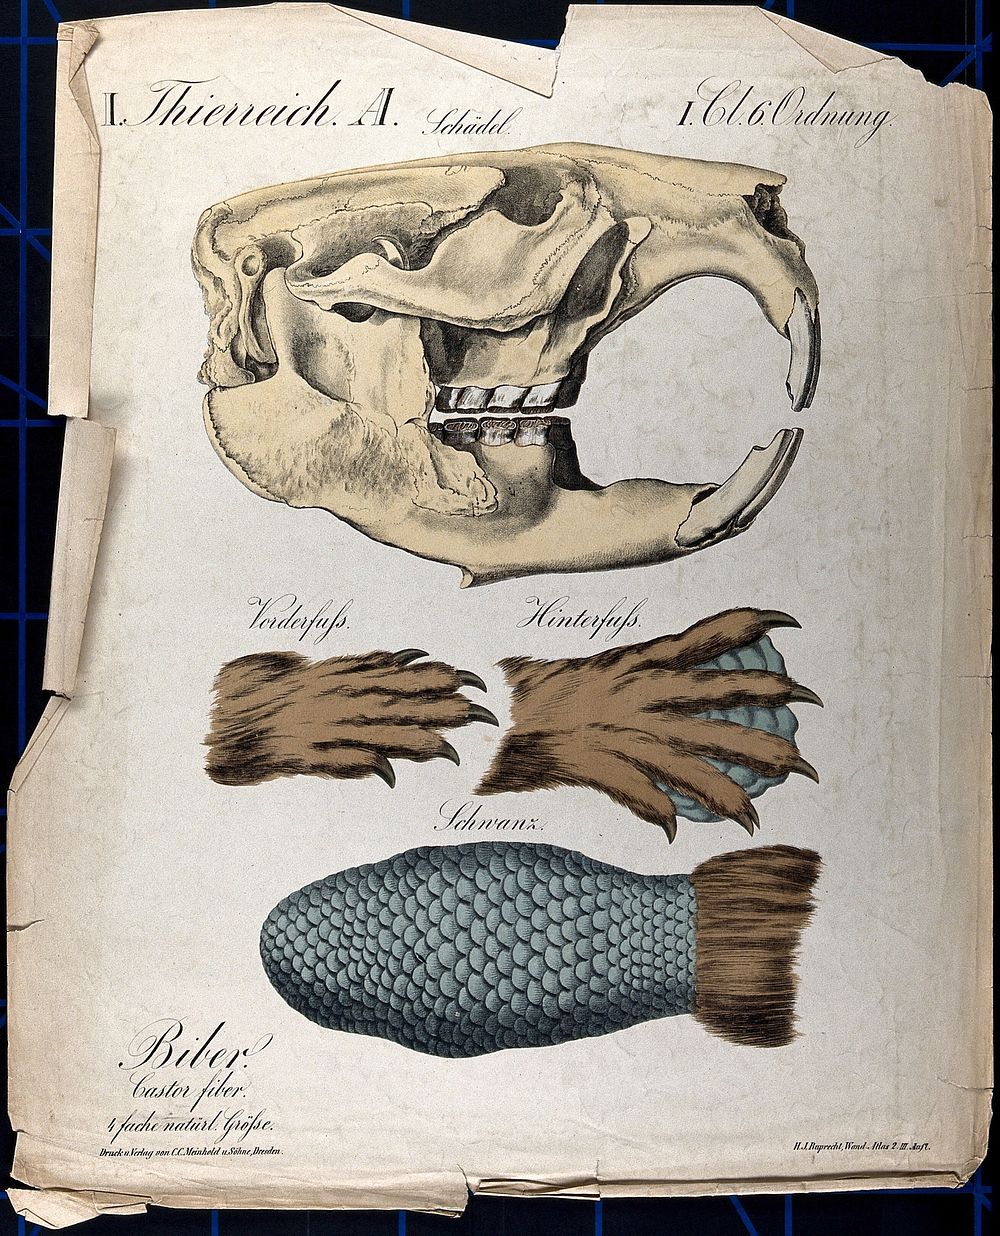 Beaver skull, with illustrations showing the fore foot, hind foot, and the tail. Chromolithograph by H.J. Ruprecht, 1877.